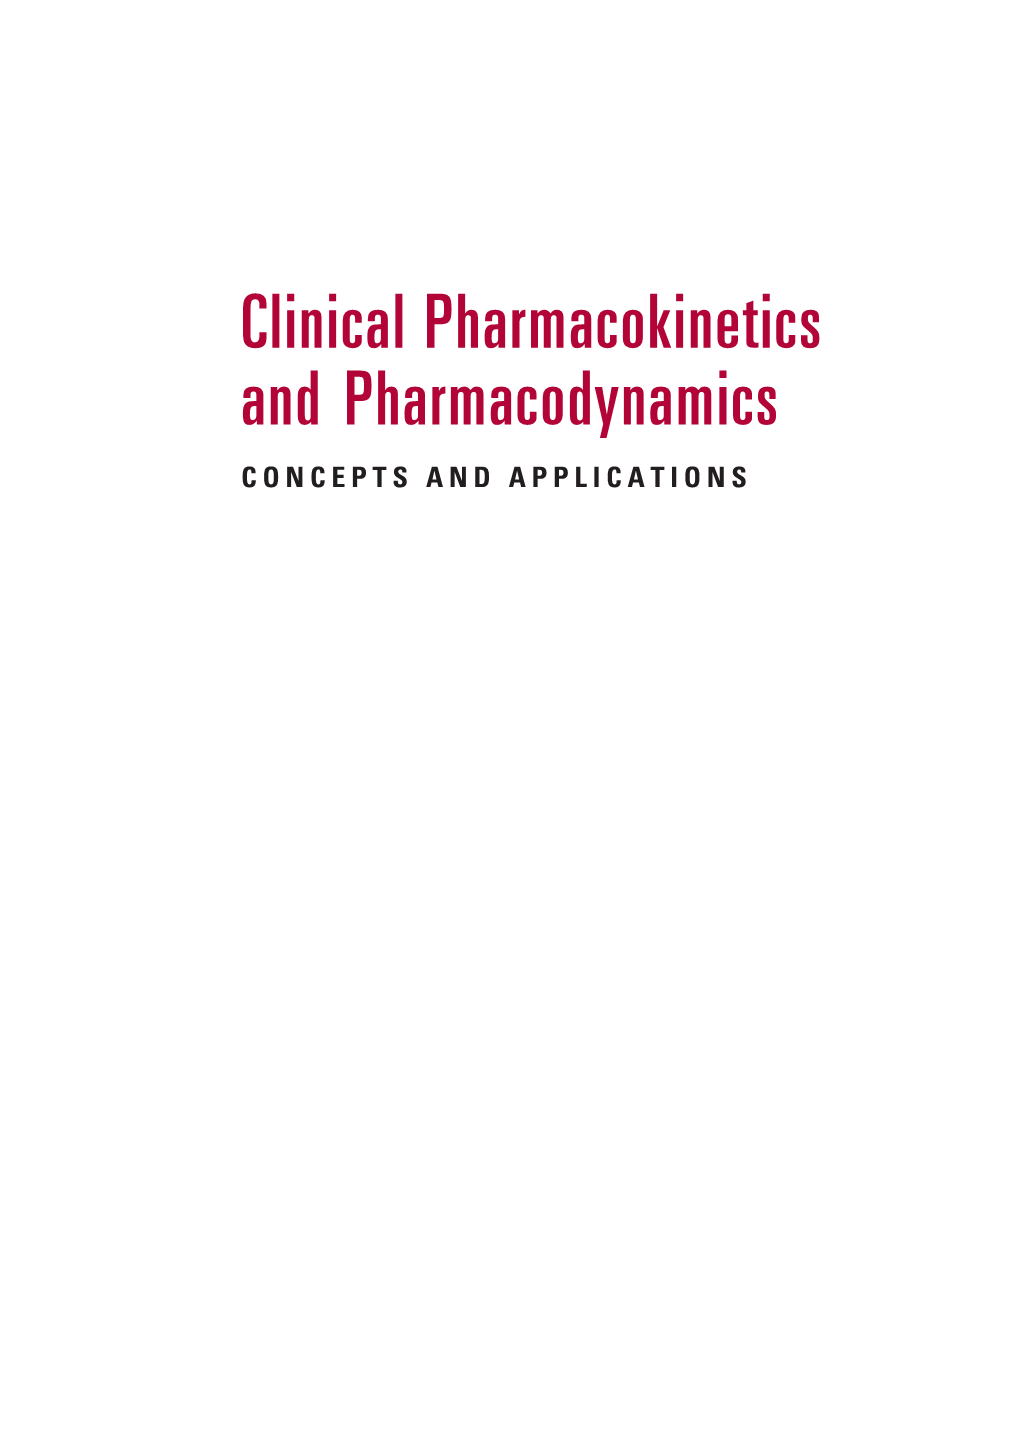 Clinical Pharmacokinetics and Pharmacodynamics CONCEPTS and APPLICATIONS 18048 FM.Qxd 11/11/09 4:31 PM Page Iii